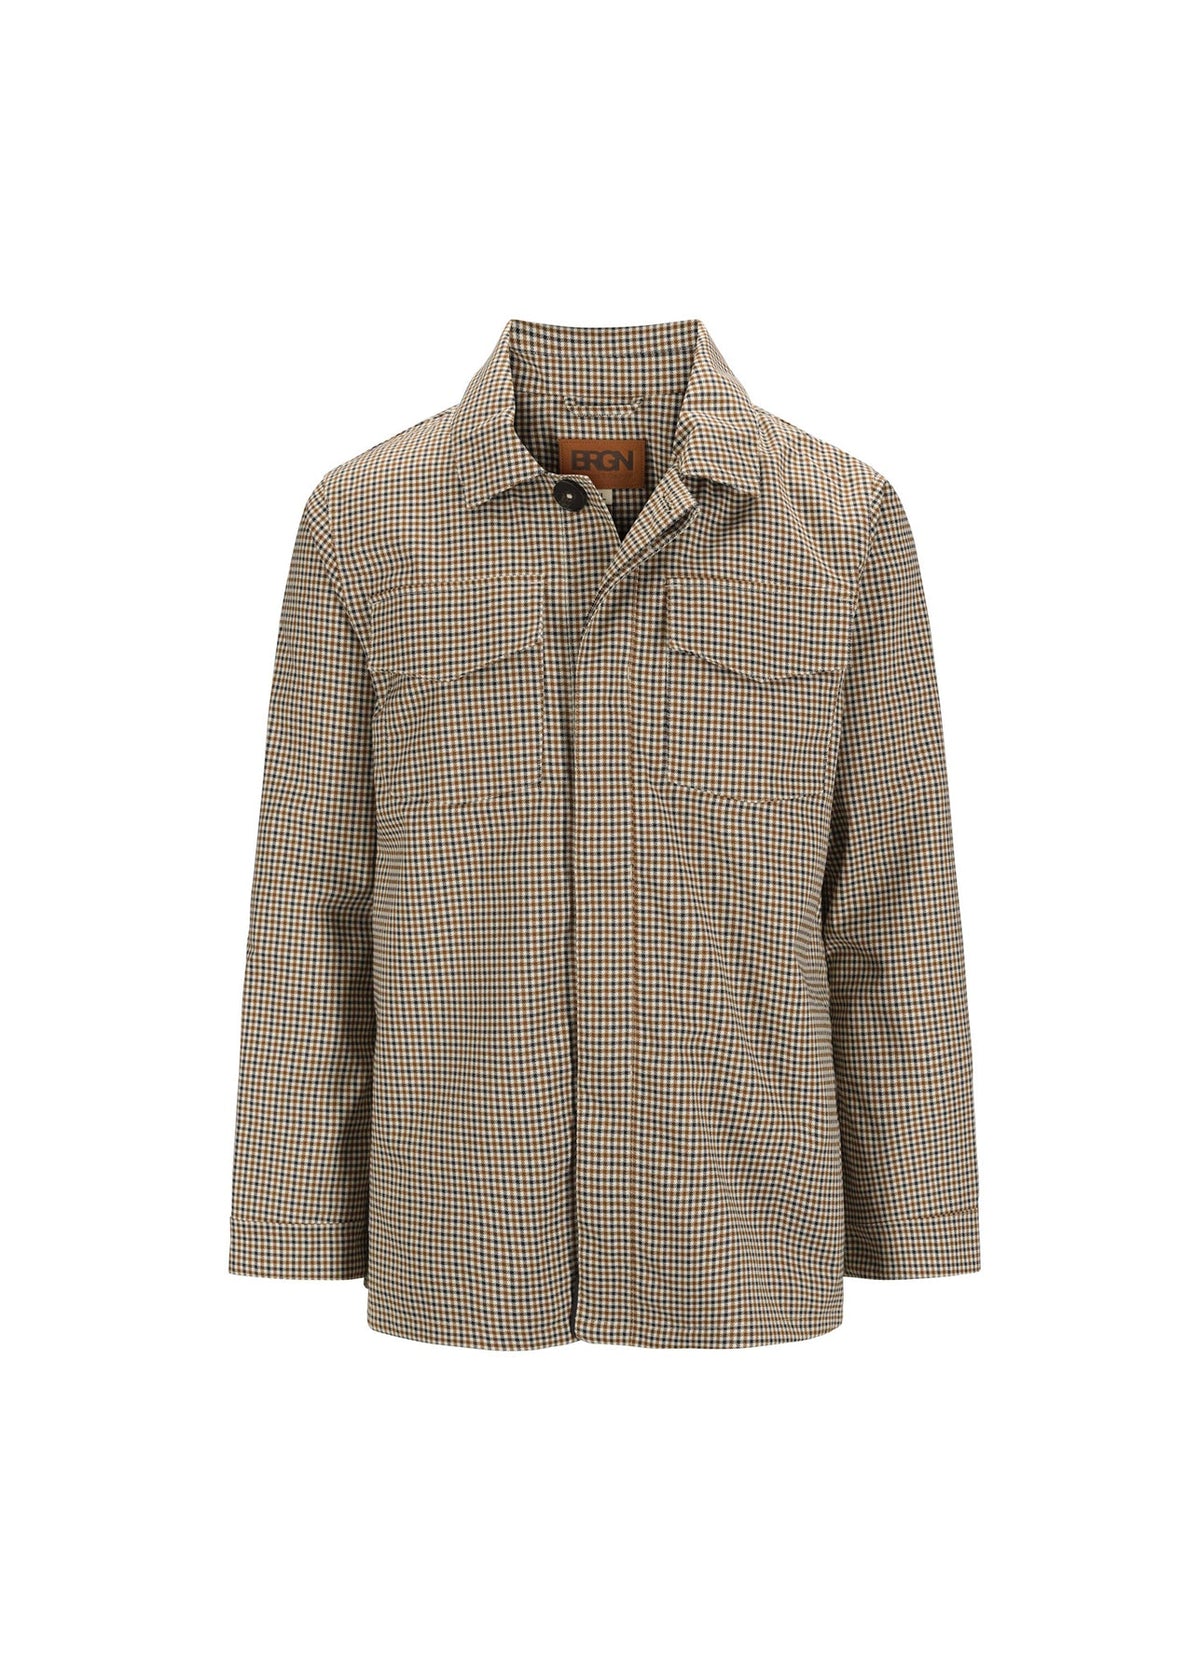 Waterproof shirt style jacket in brown check with removable hood